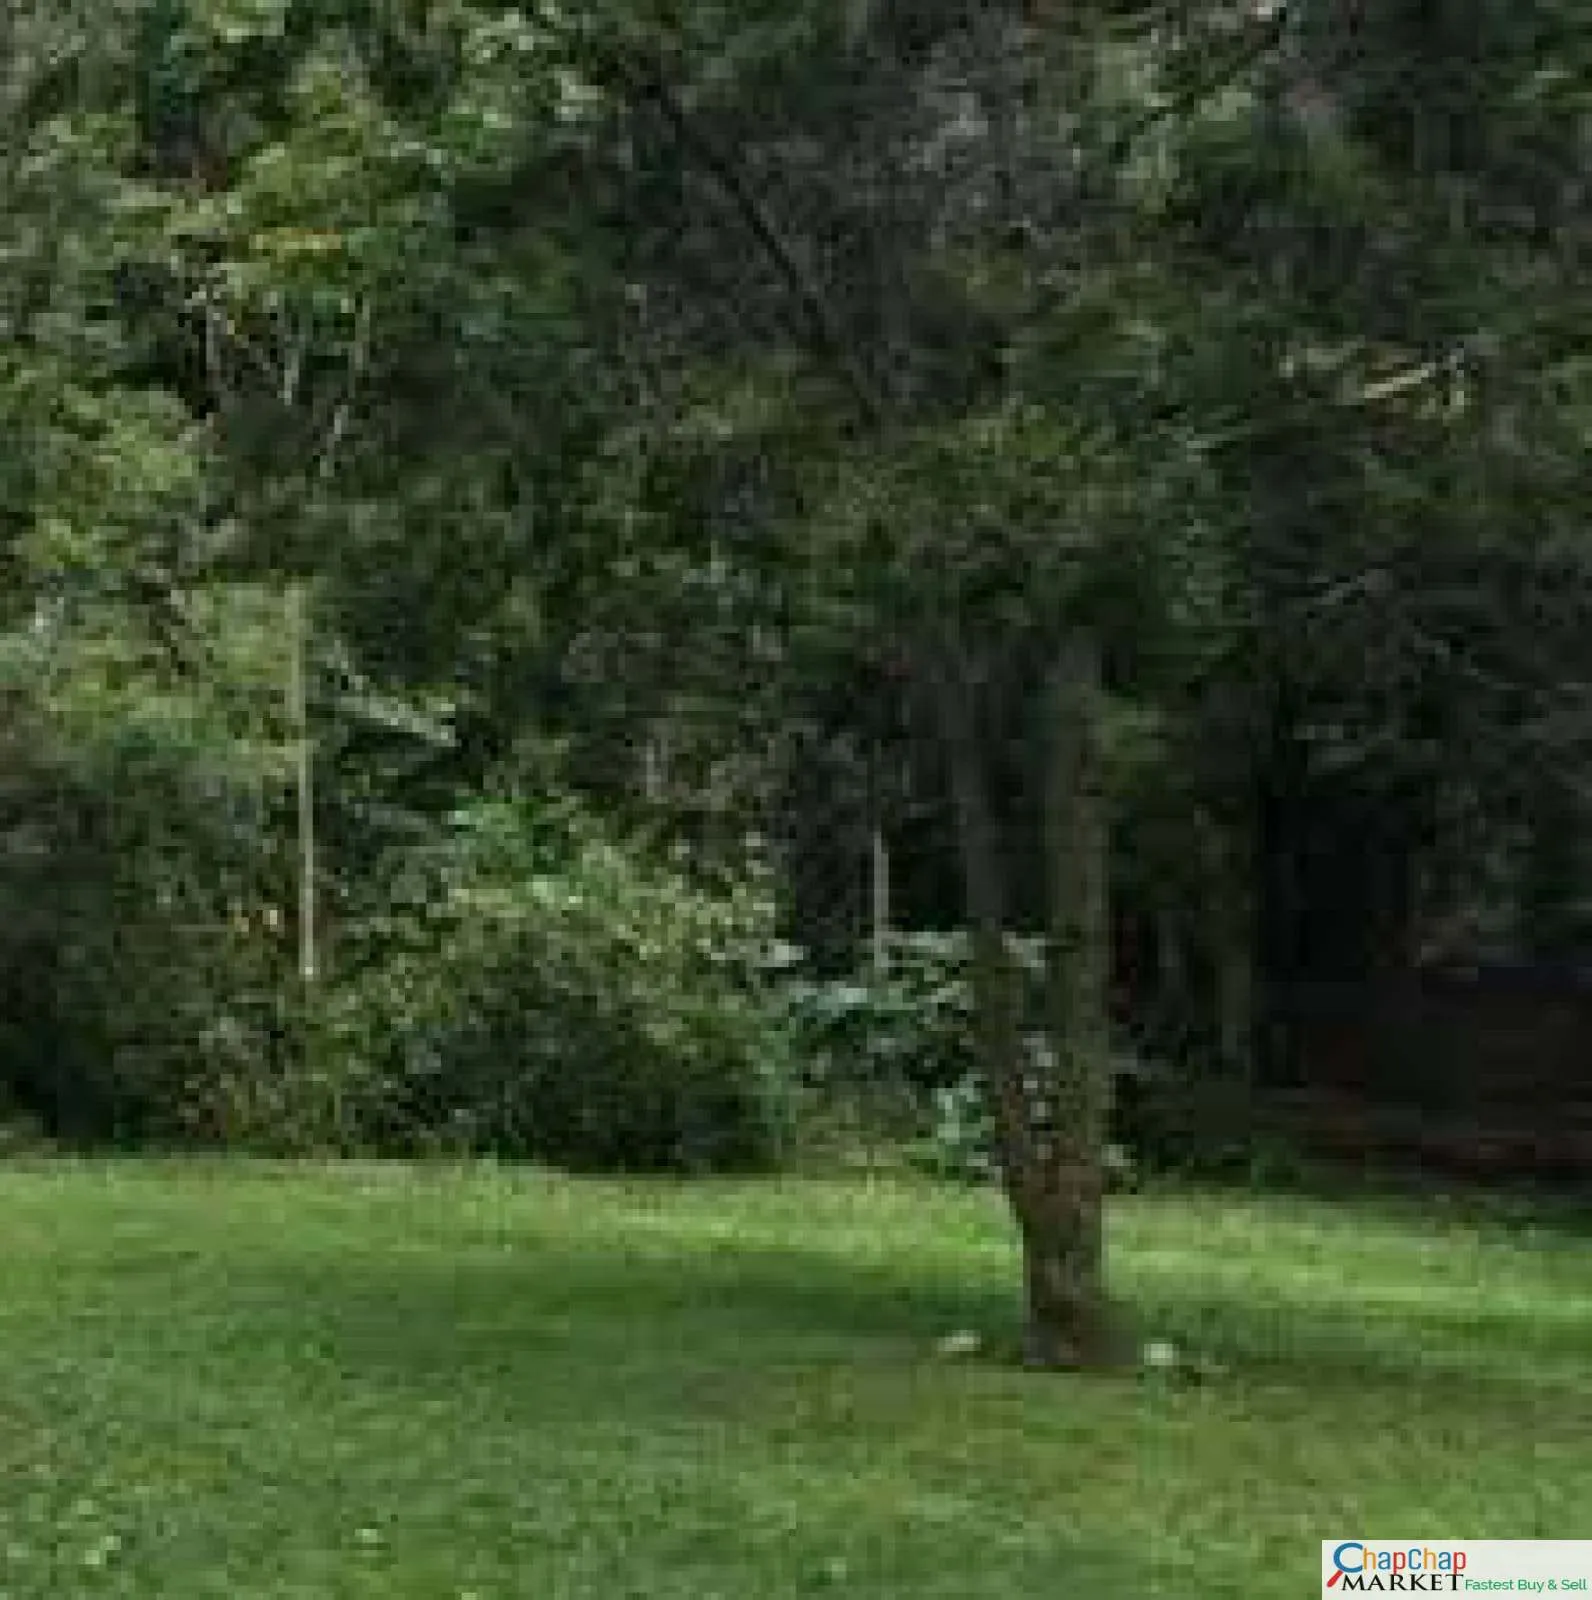 Land For Sale Real Estate-Land for sale in Karen KCB 1 Acre Ready Title Deed QUICK SALE Exclusive